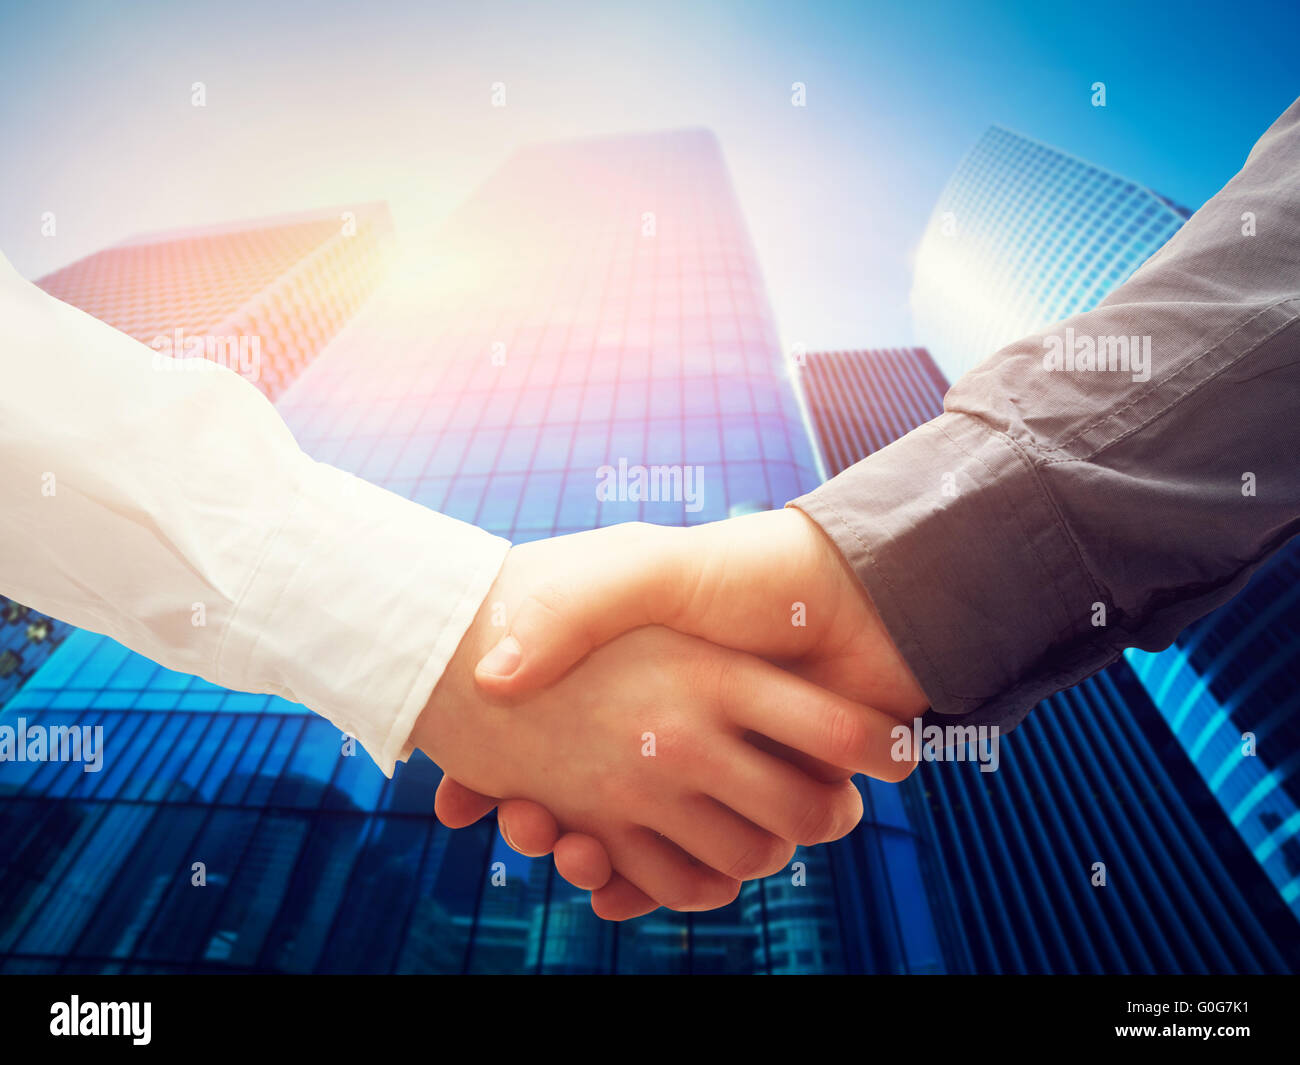 Business handshake on modern skyscrapers background. Deal Stock Photo